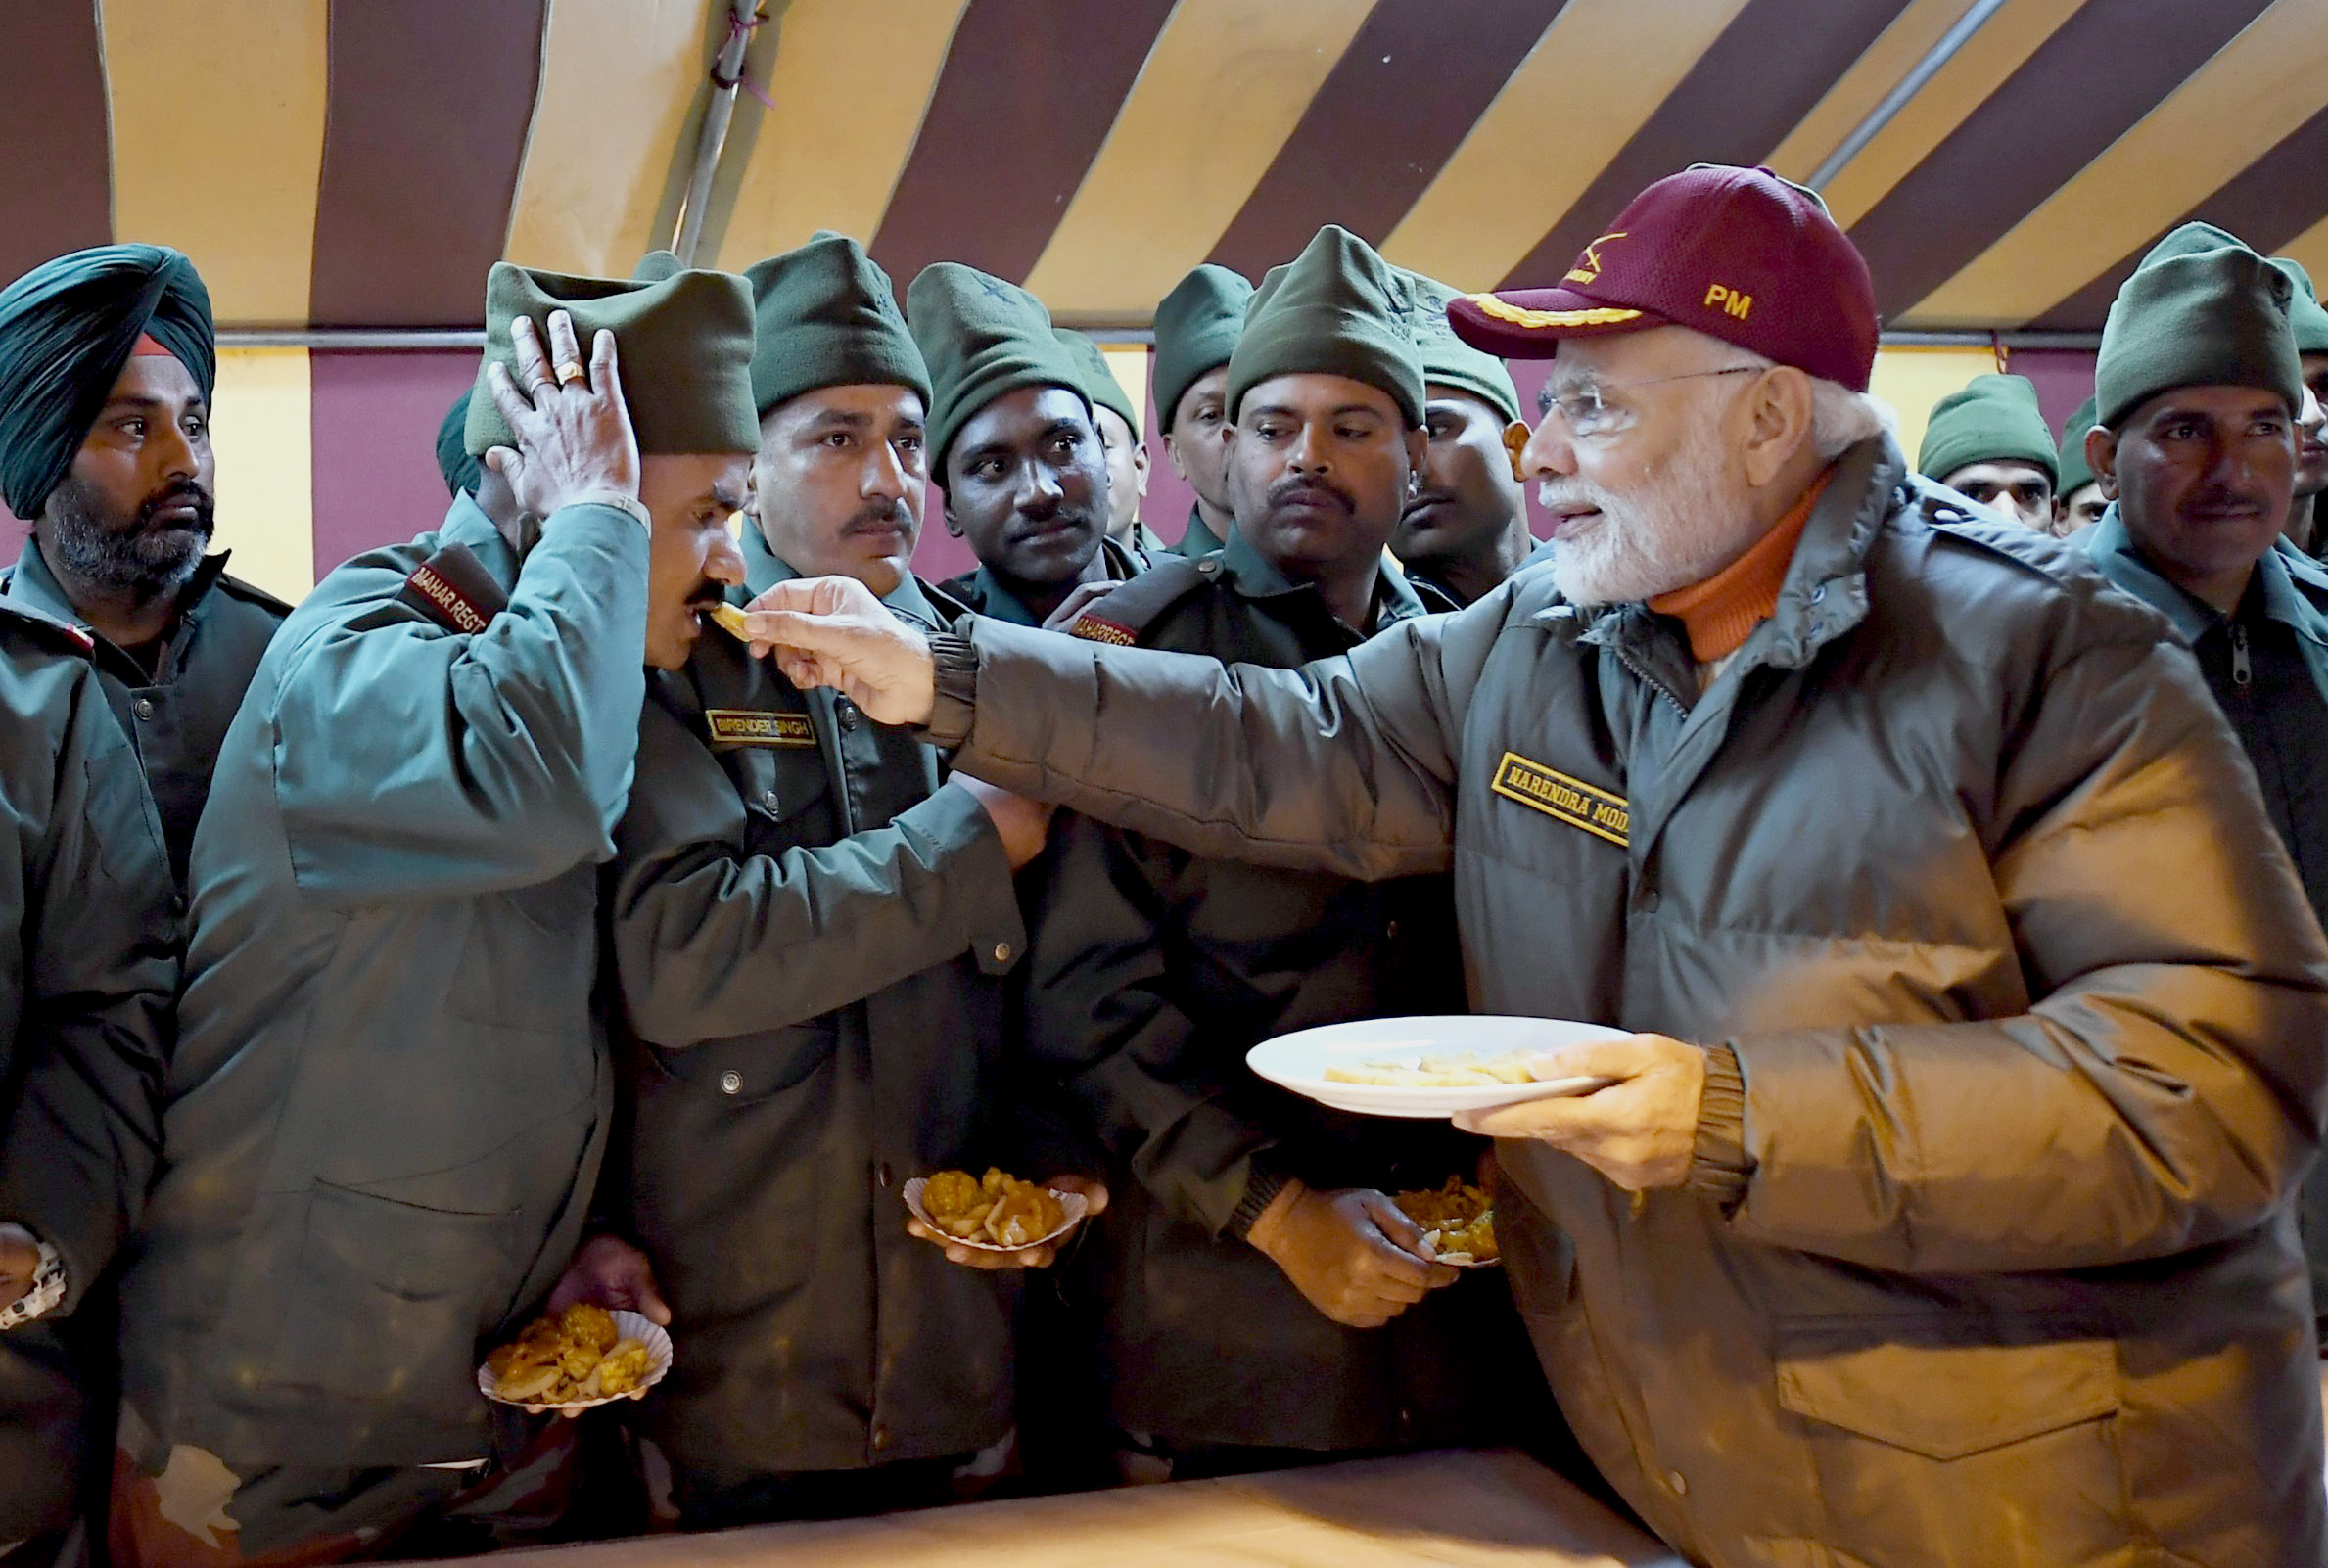 The Prime Minister, Shri Narendra Modi celebrating Diwali with the jawans of the Indian Army and ITBP, at Harsil, in Uttarakhand on November 07, 2018.